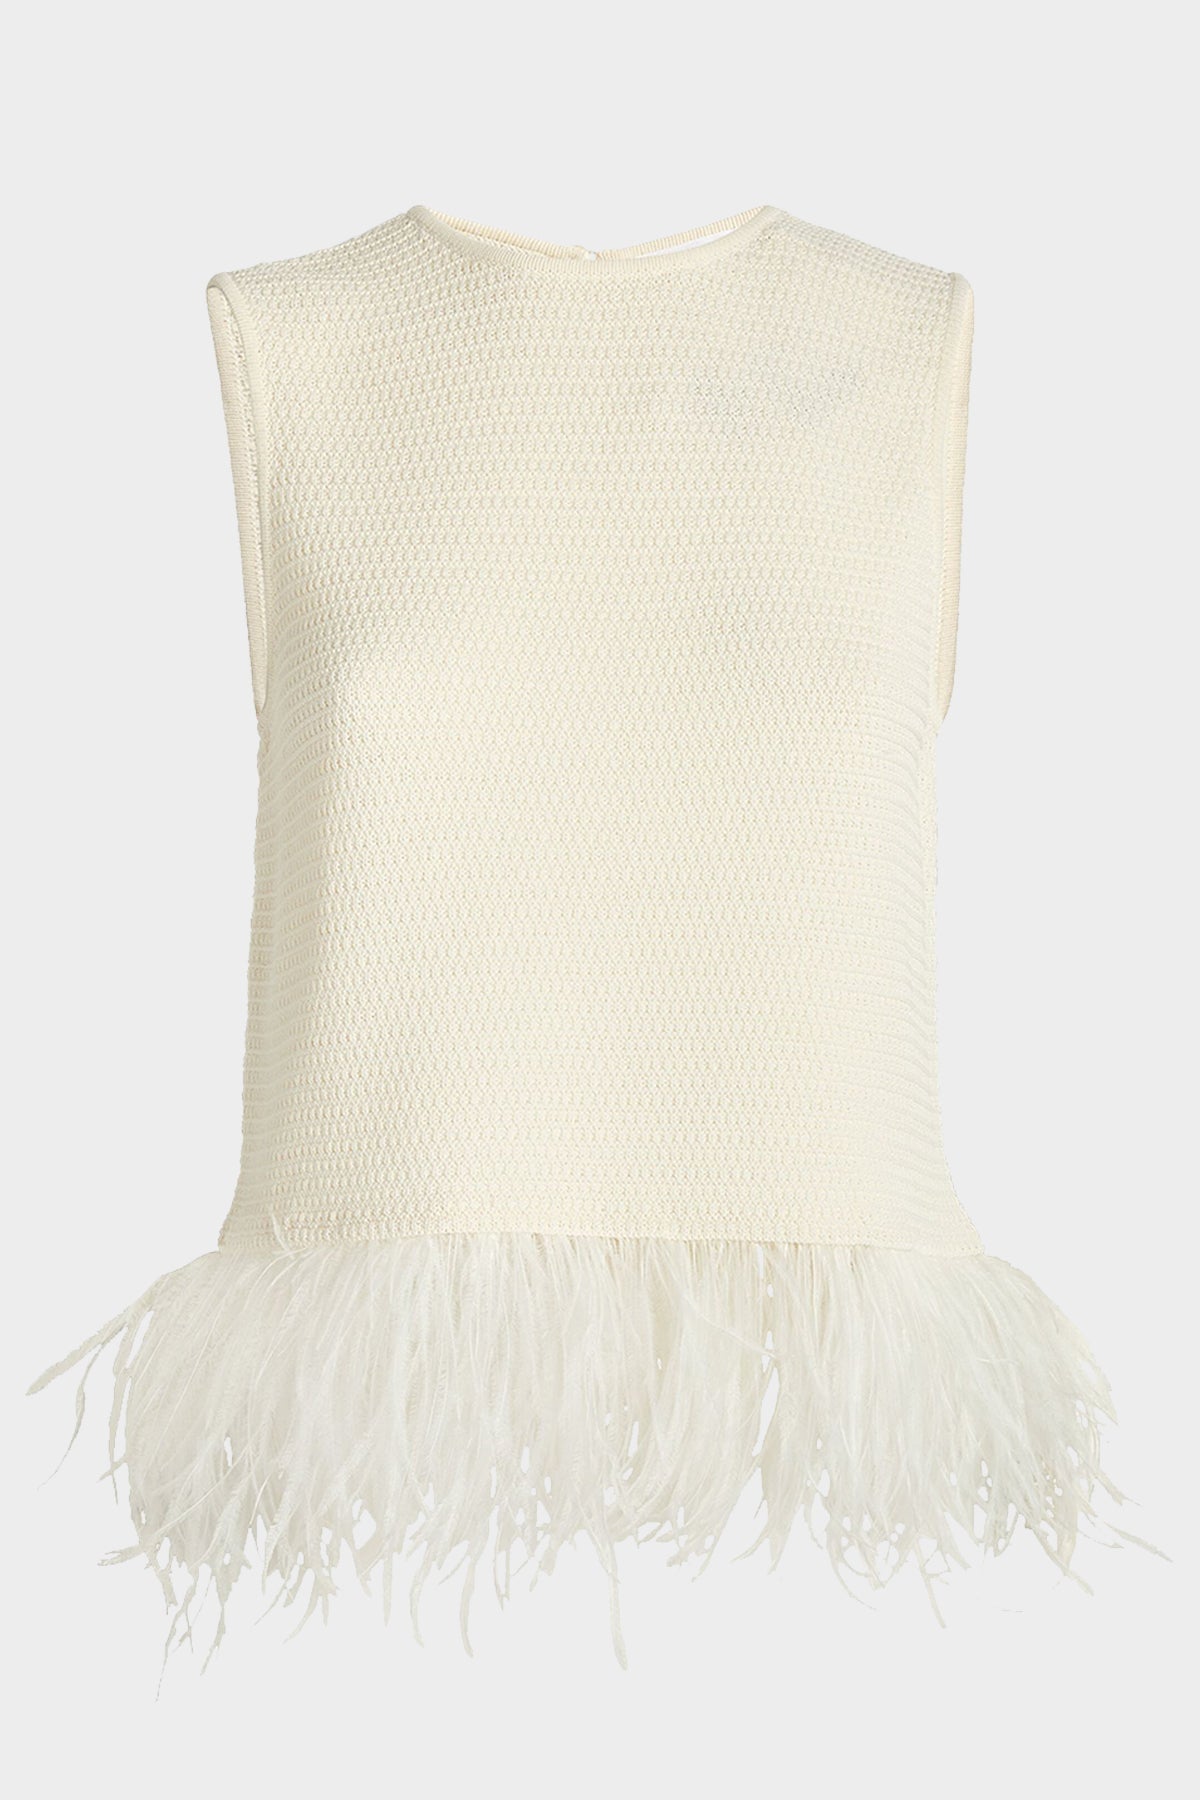 Crochet Feather Top in Off White - shop-olivia.com